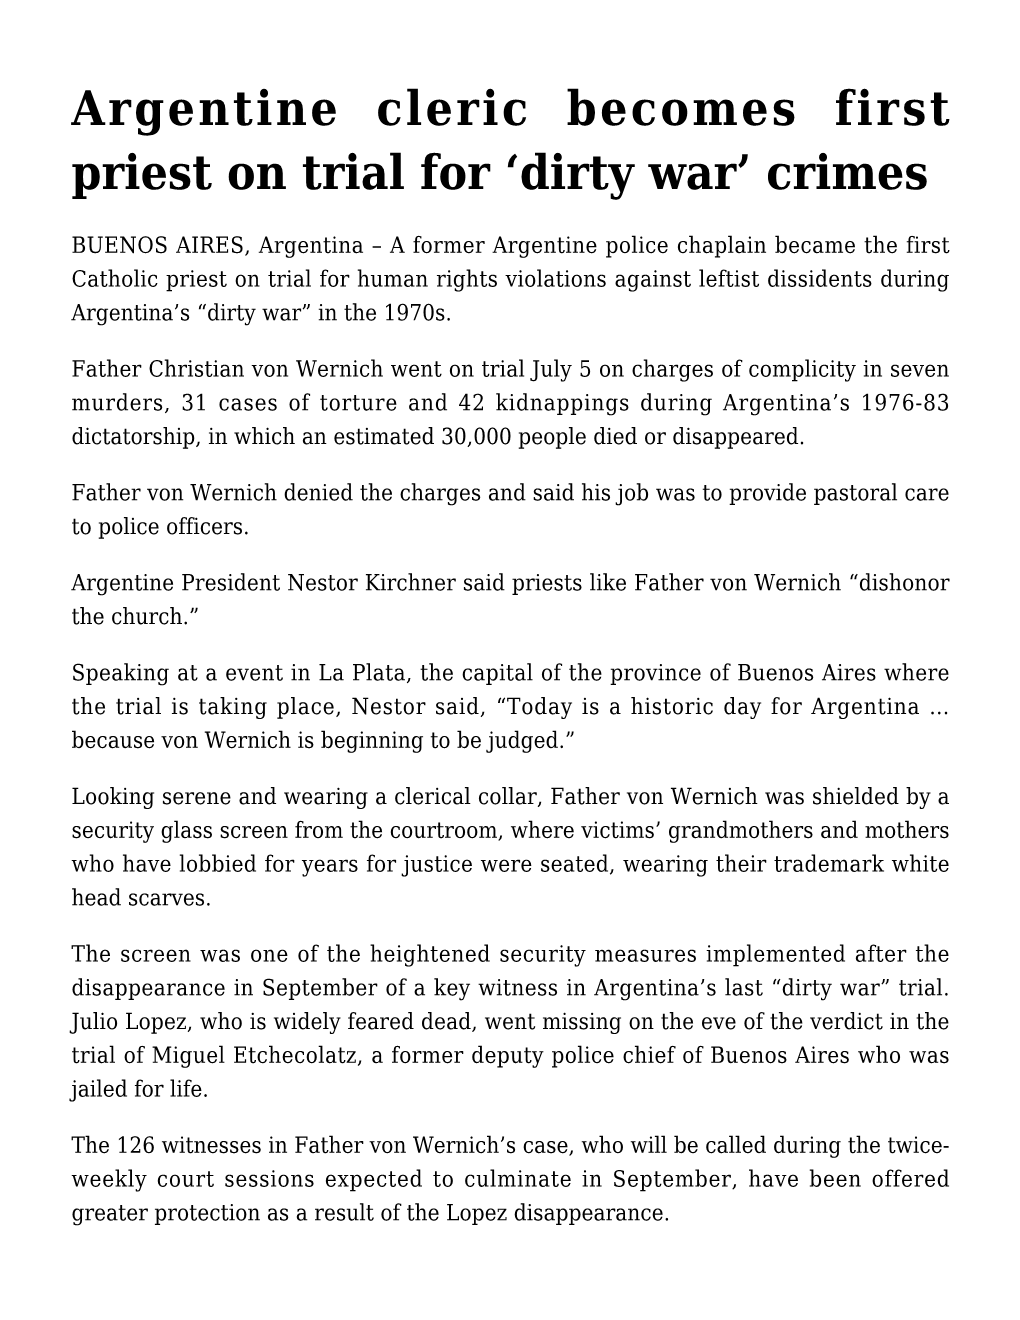 Argentine Cleric Becomes First Priest on Trial for 'Dirty War' Crimes